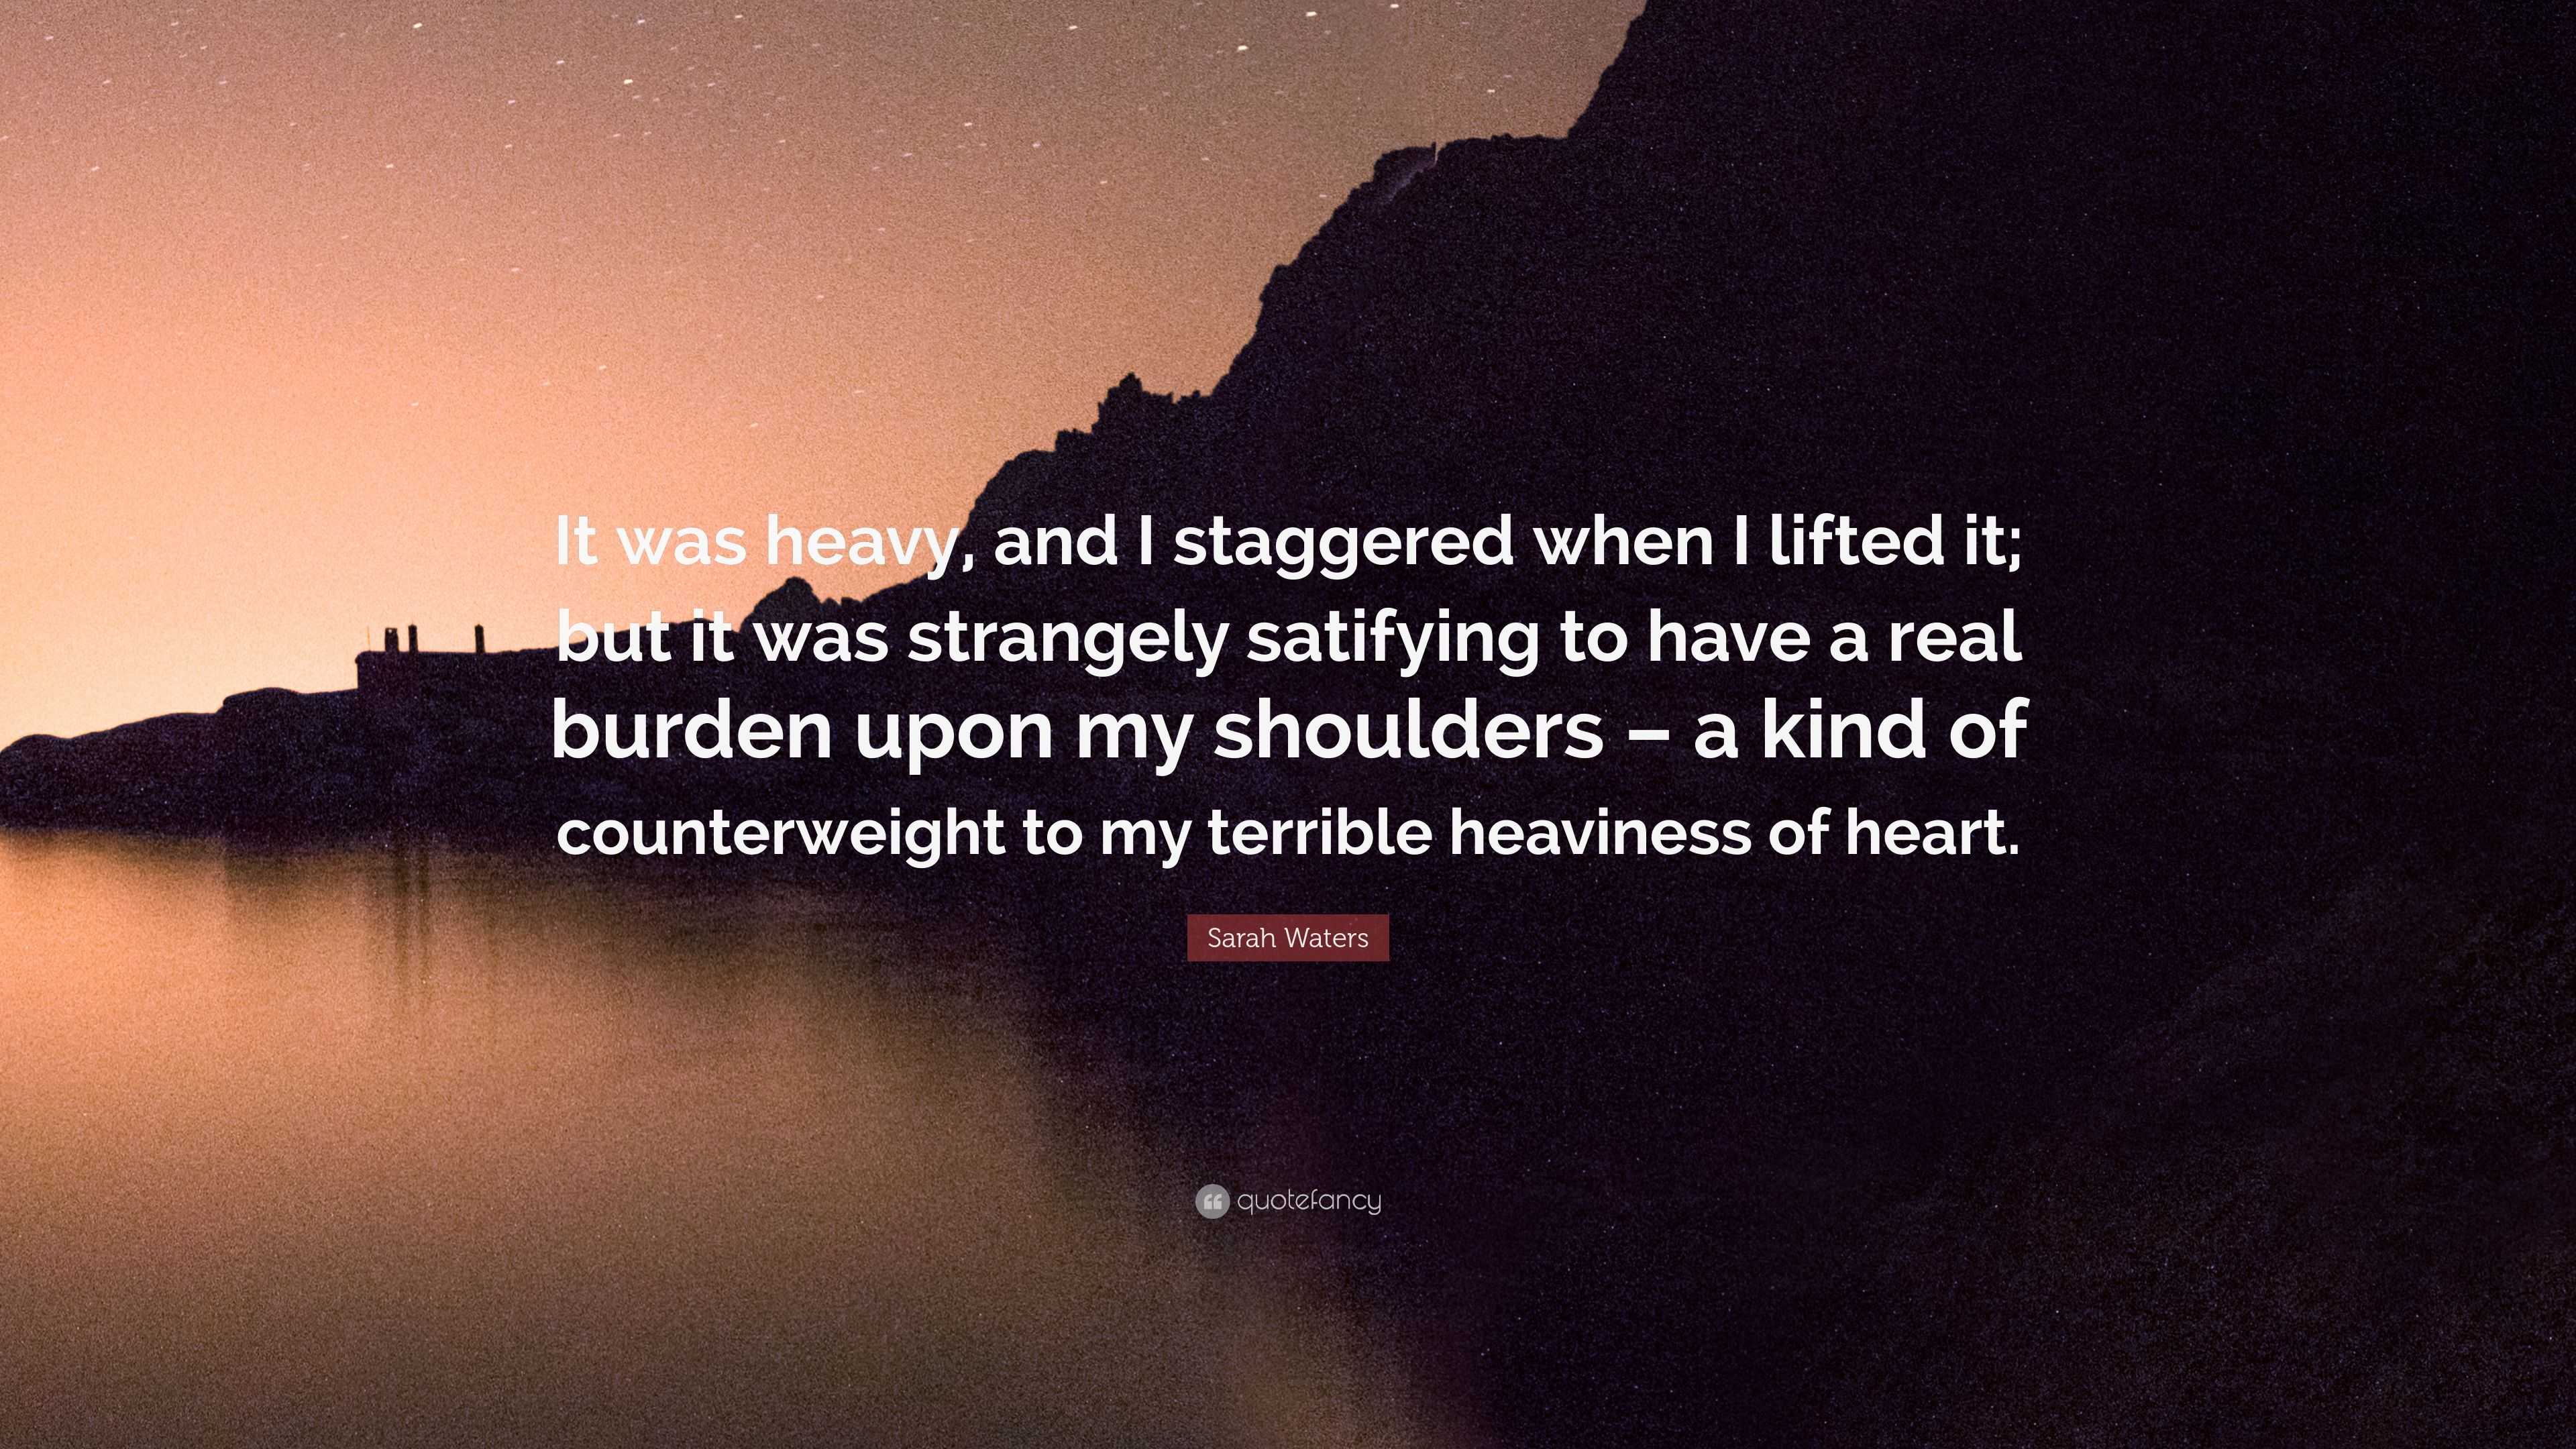 Sarah Waters Quote: “It was heavy, and I staggered when I lifted it ...